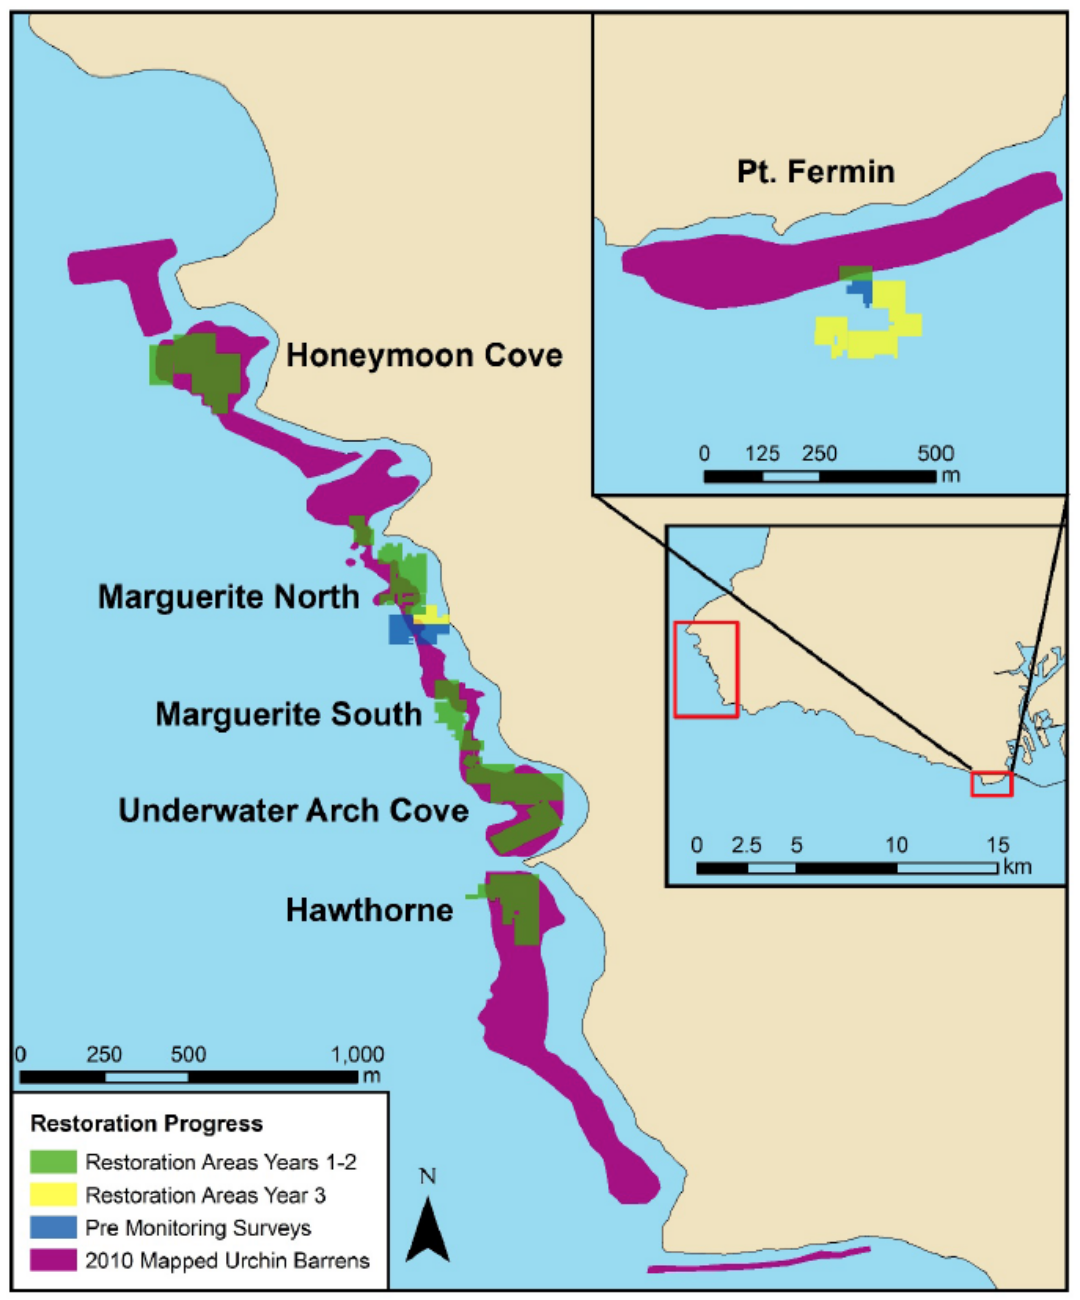 Restoration map showing urchin barrens mapped, restoration areas completed, and ares in progress.